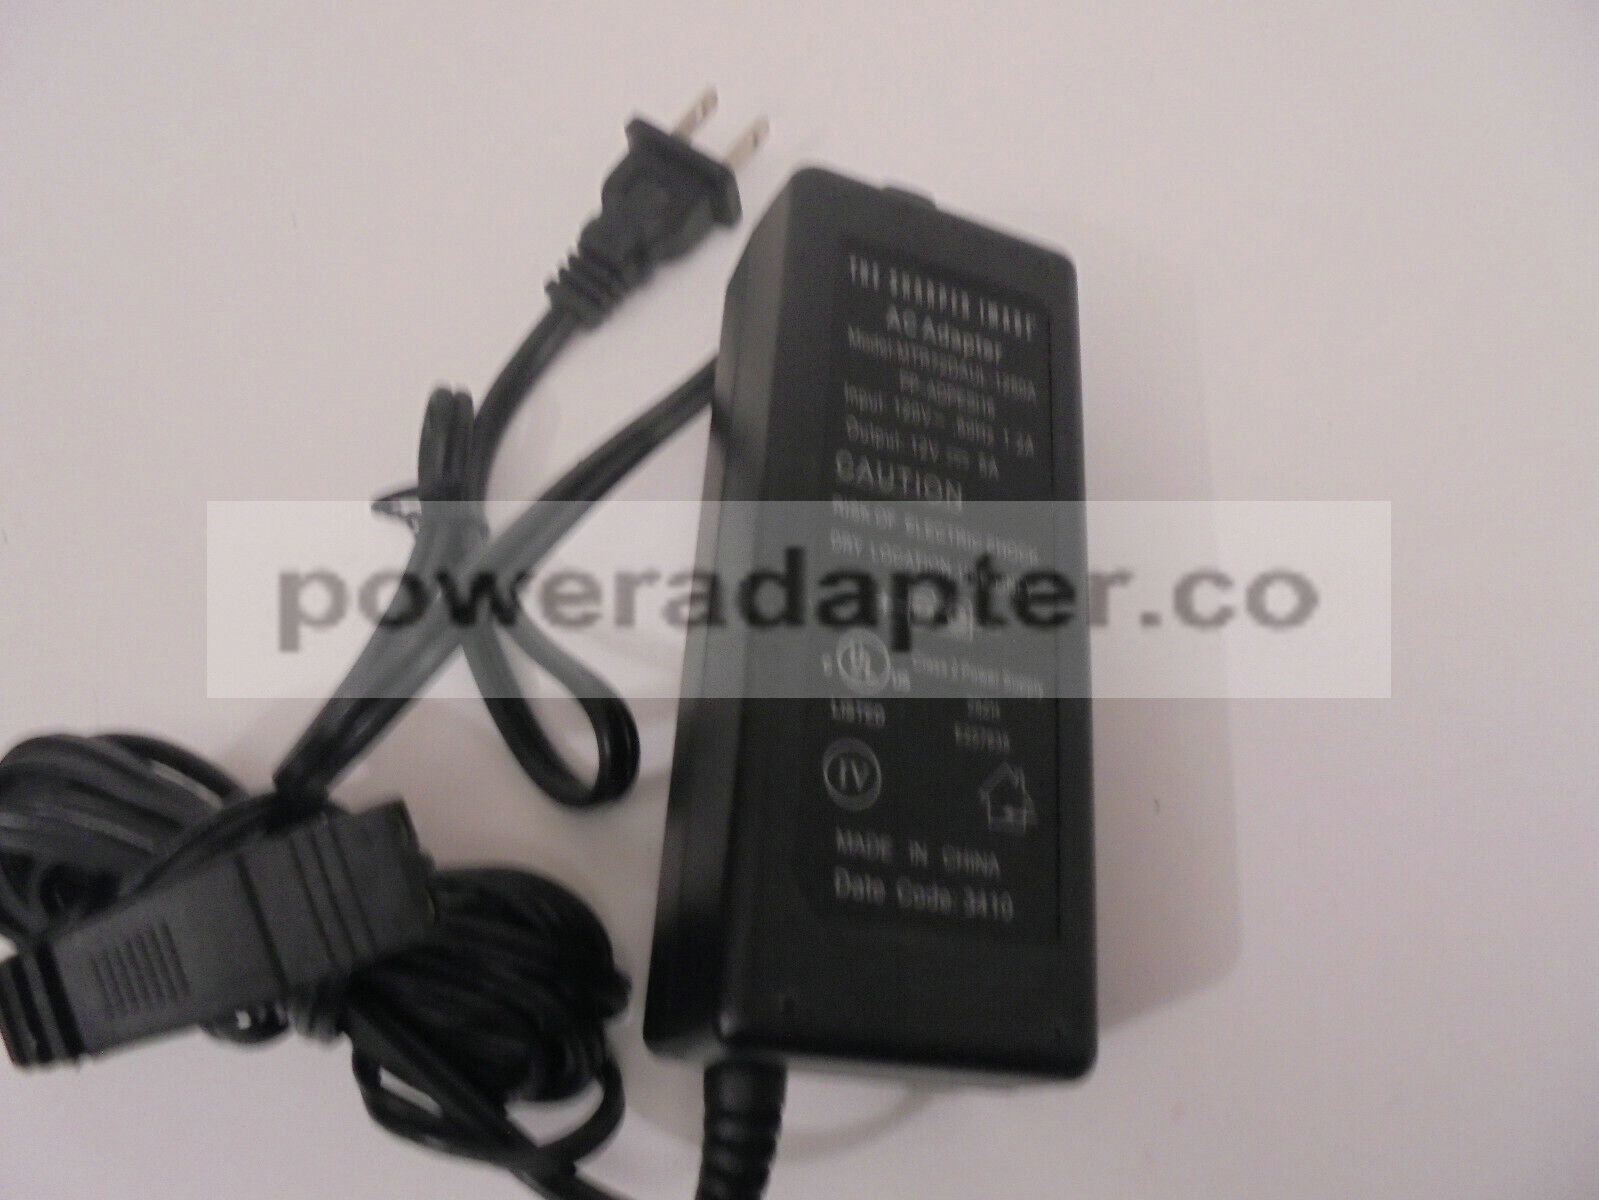 THE SHARPER IMAGE MTR72DAUL-1250A OEM POWER SUPPLY AC ADAPTER CHARGER Condition: Used: An item that has been used pr